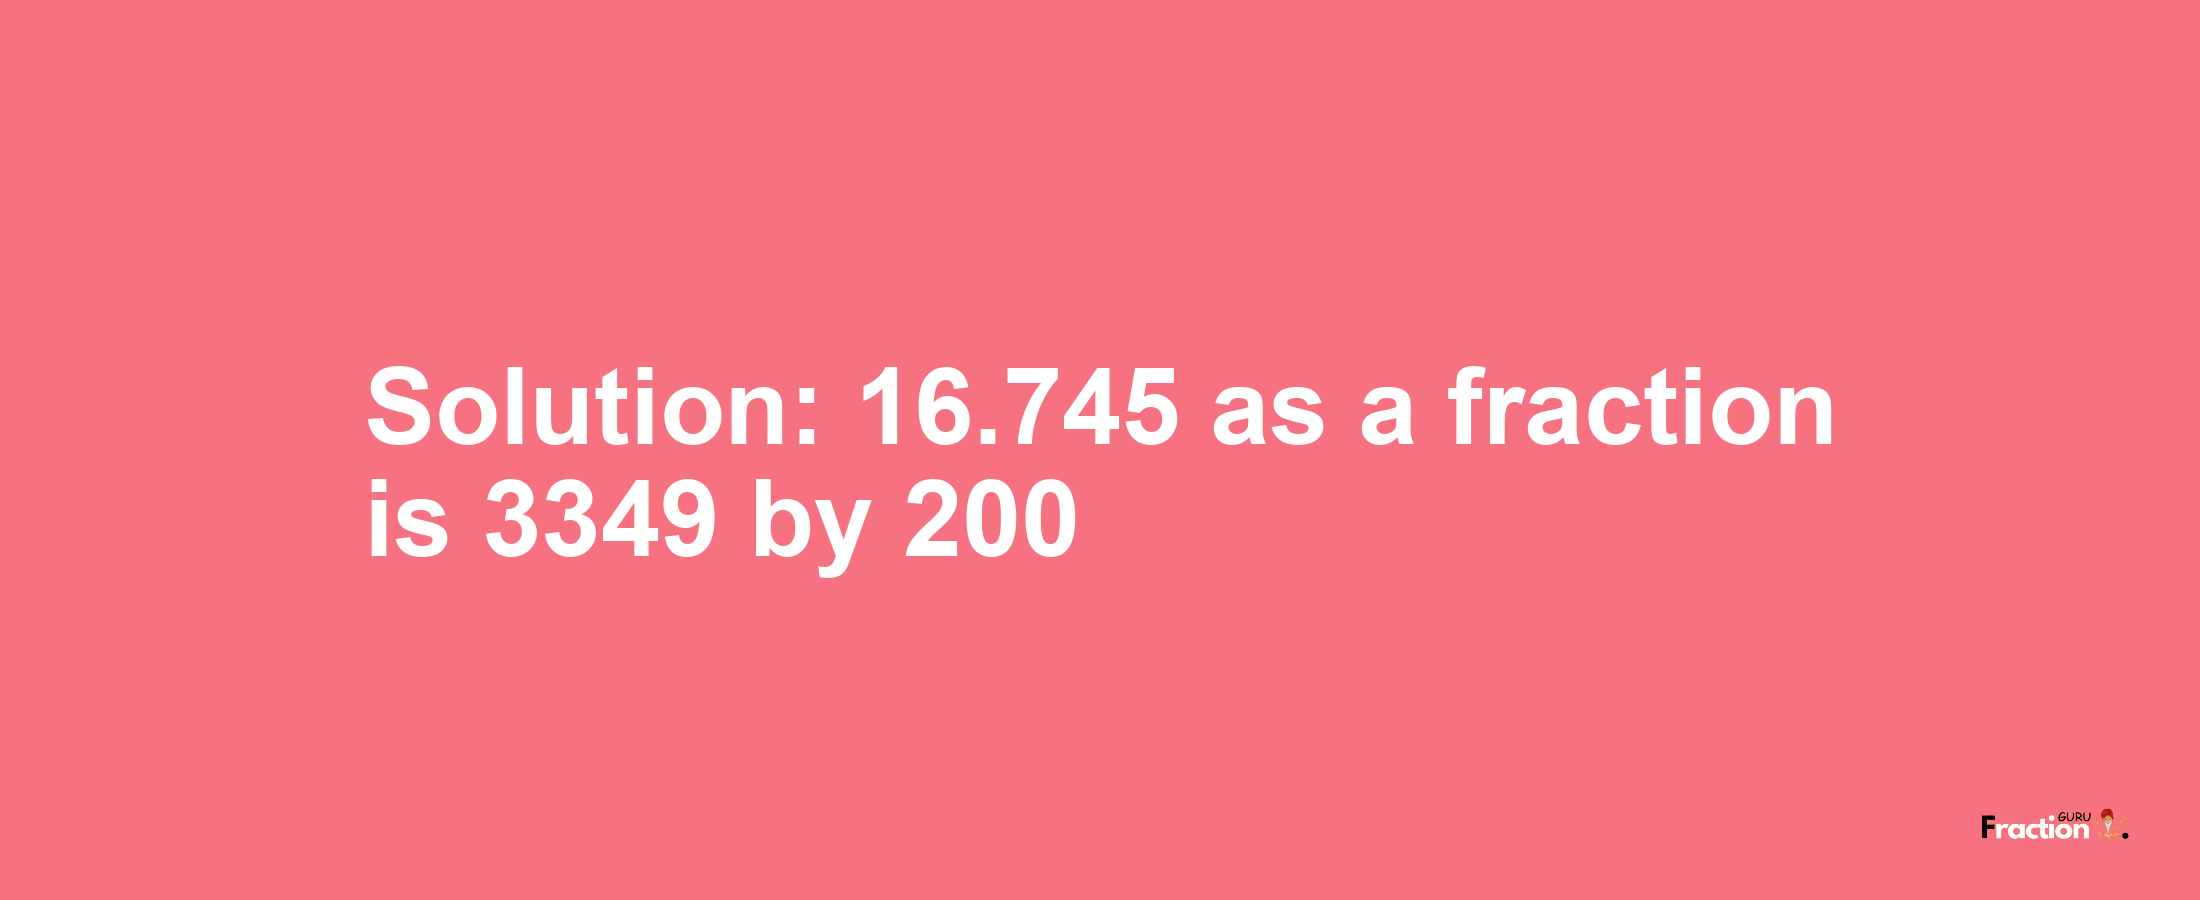 Solution:16.745 as a fraction is 3349/200